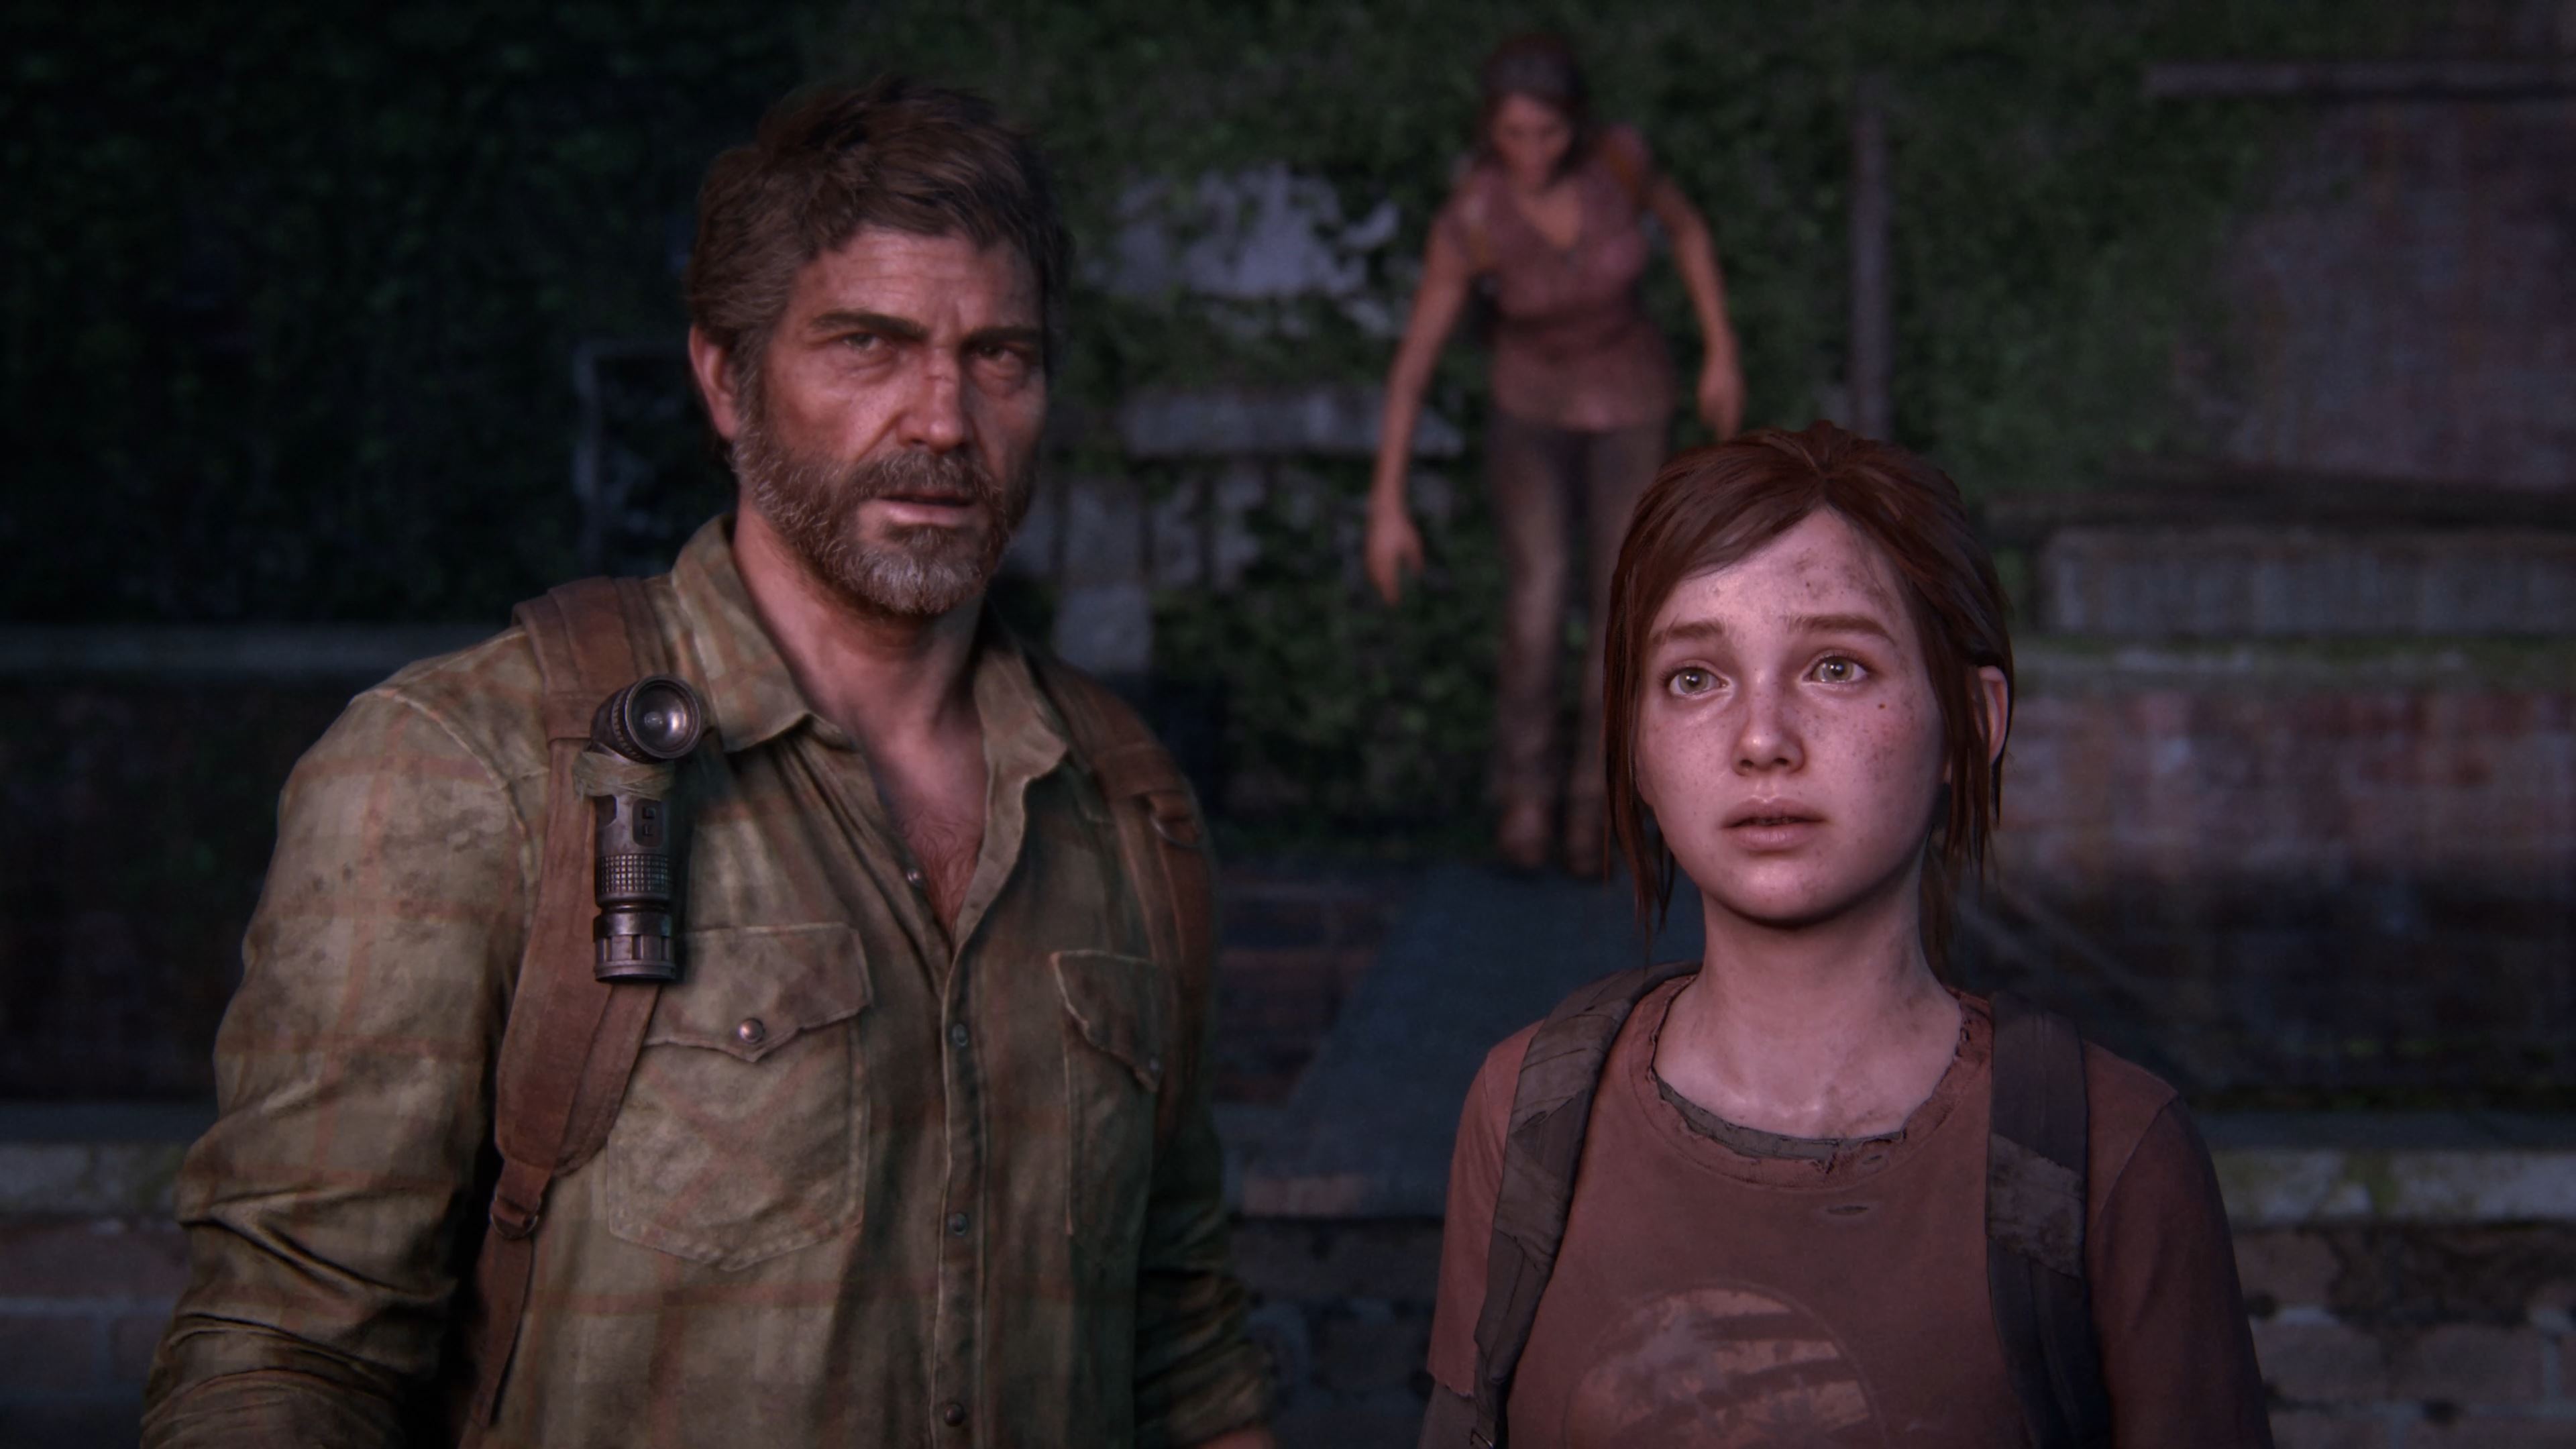 The Last of Us Remake Leak Reveals High Price Tag, Graphics, and Lack of Multiplayer | Den of Geek